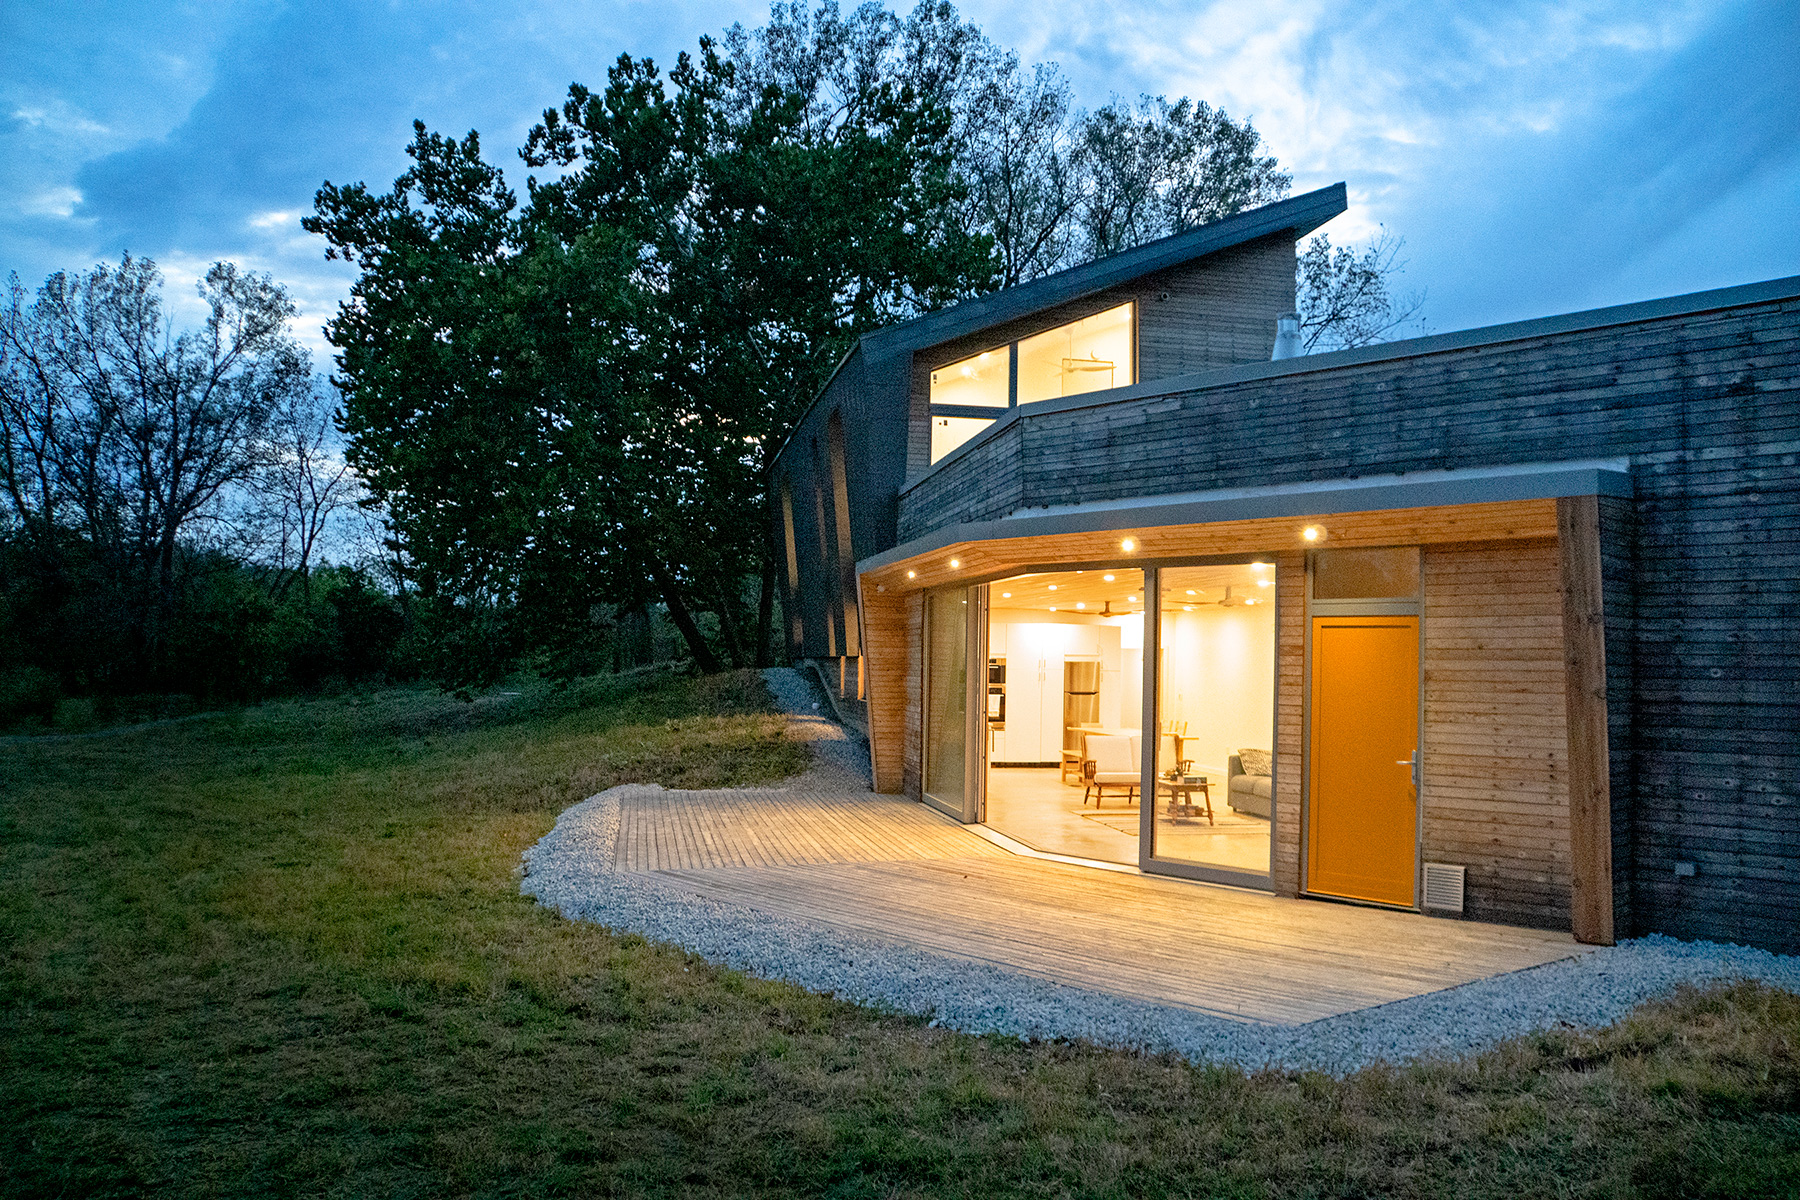 Tips for Designing a Net-Zero Energy Home